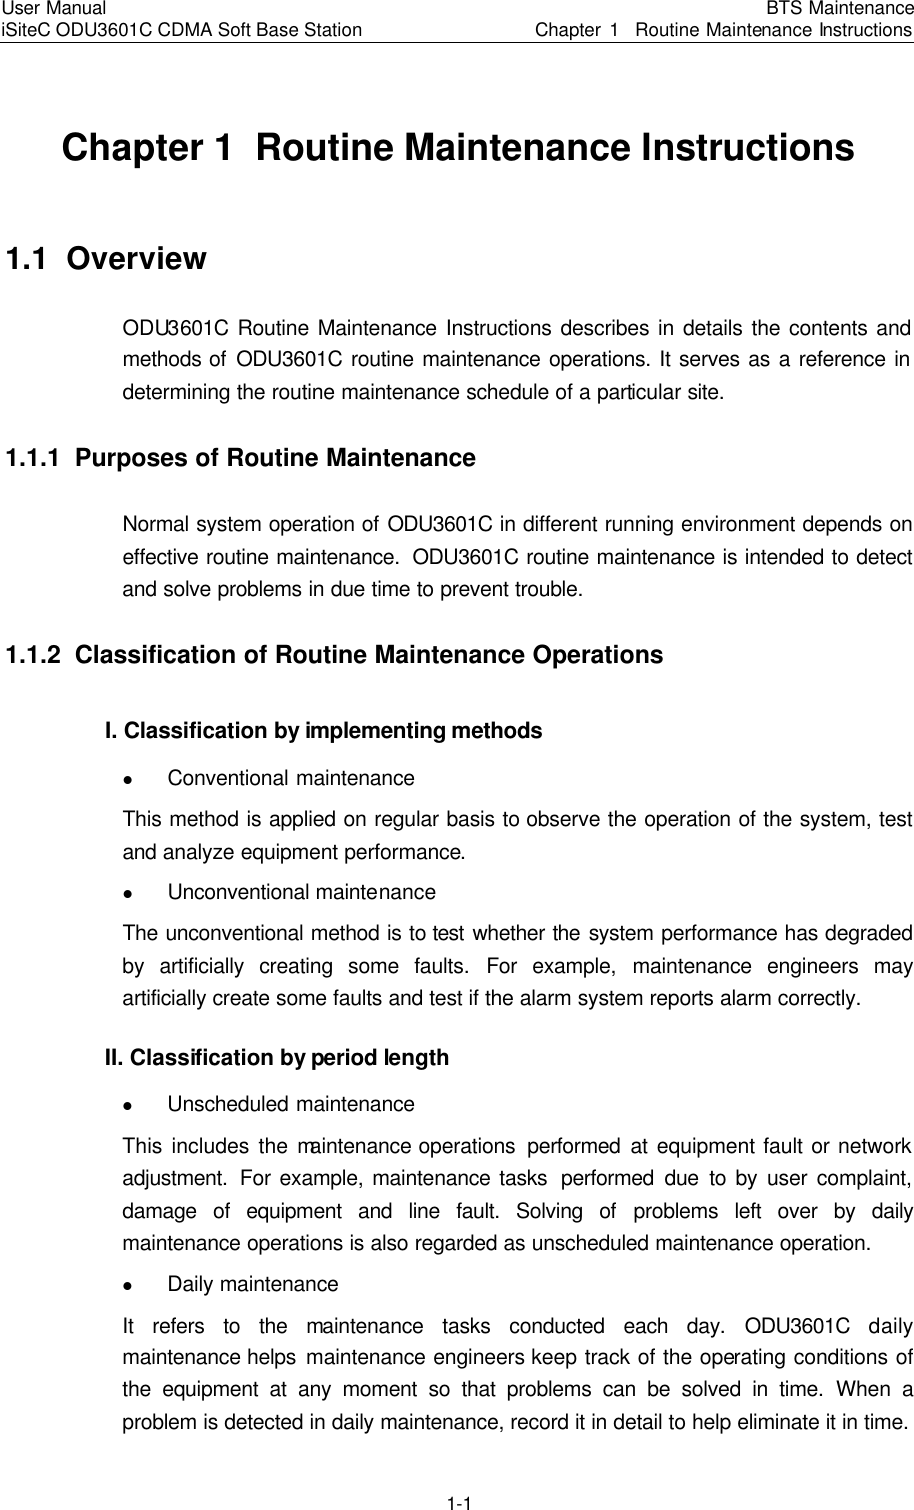 User Manual iSiteC ODU3601C CDMA Soft Base Station BTS MaintenanceChapter 1  Routine Maintenance Instructions 1-1 Chapter 1  Routine Maintenance Instructions 1.1  Overview ODU3601C Routine Maintenance Instructions describes in details the contents and methods of ODU3601C routine maintenance operations. It serves as a reference in determining the routine maintenance schedule of a particular site.　1.1.1  Purposes of Routine Maintenance　Normal system operation of ODU3601C in different running environment depends on effective routine maintenance.　ODU3601C routine maintenance is intended to detect and solve problems in due time to prevent trouble.　1.1.2  Classification of Routine Maintenance Operations　I. Classification by implementing methods　l Conventional maintenance　This method is applied on regular basis to observe the operation of the system, test and analyze equipment performance.　l Unconventional maintenance　The unconventional method is to test whether the system performance has degraded by artificially creating some faults.　For example, maintenance engineers may artificially create some faults and test if the alarm system reports alarm correctly.　II. Classification by period length l Unscheduled maintenance　This includes the maintenance operations  performed at equipment fault or network adjustment.　For example, maintenance tasks  performed due to by user complaint, damage of equipment and line fault. Solving of problems left over by daily maintenance operations is also regarded as unscheduled maintenance operation.　l Daily maintenance　It refers to the maintenance tasks conducted each day.　ODU3601C daily maintenance helps  maintenance engineers keep track of the operating conditions of the equipment at any moment so that problems can be solved in time.　When a problem is detected in daily maintenance, record it in detail to help eliminate it in time.　